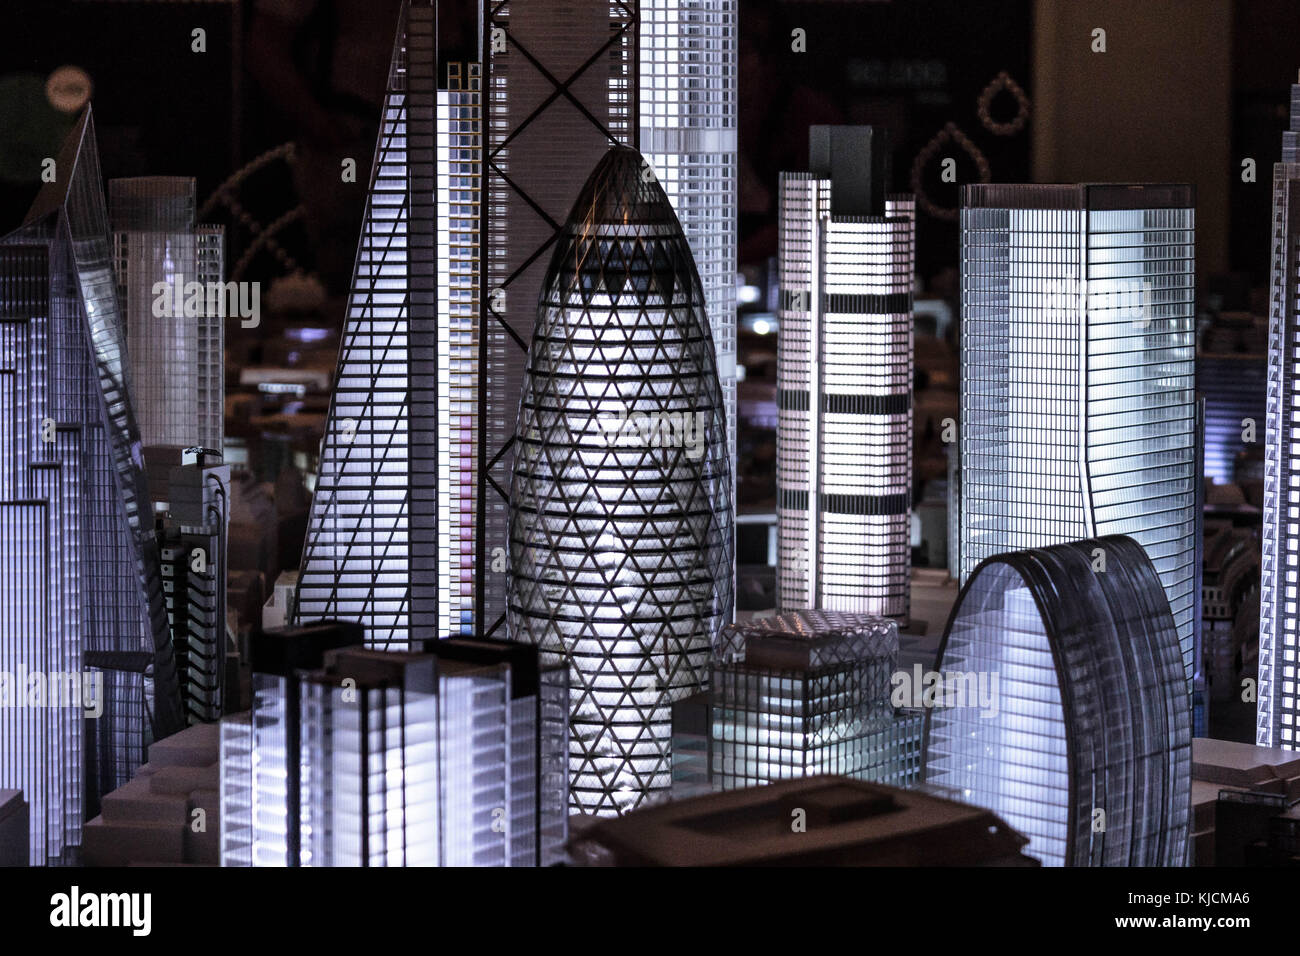 Great archtictural model of the Cluster in the City of London, where amazing architectural constructions take place such as the Gherkin or Lloyd's. Stock Photo